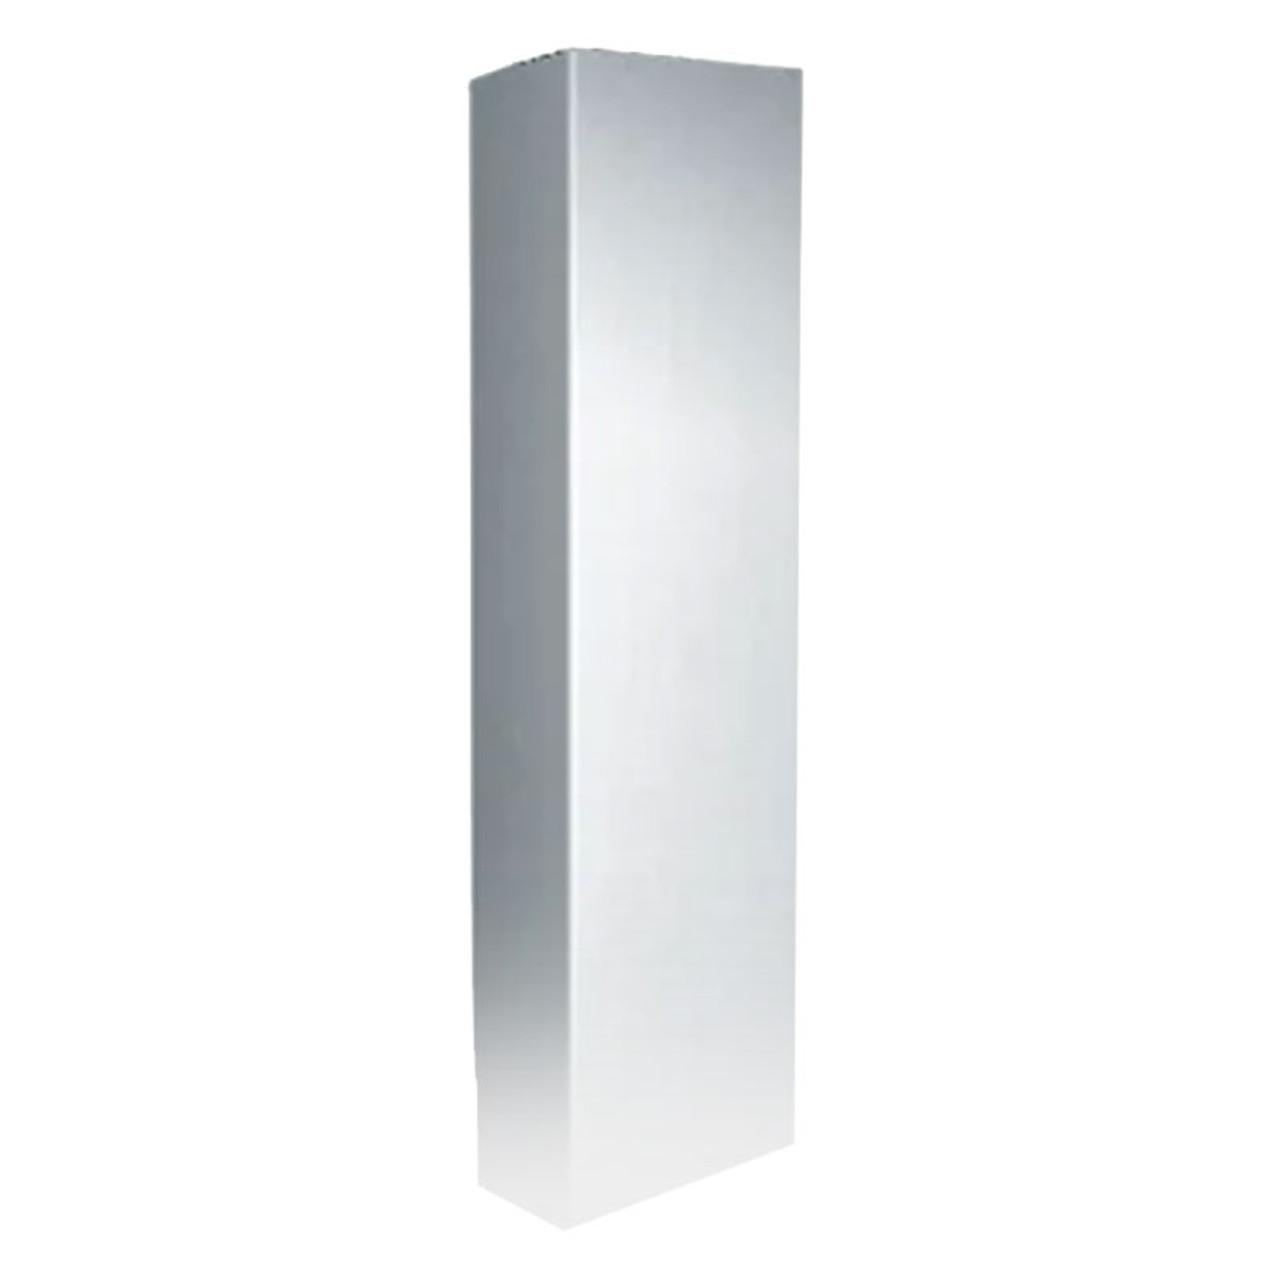 Stainless Steel Corner Guards